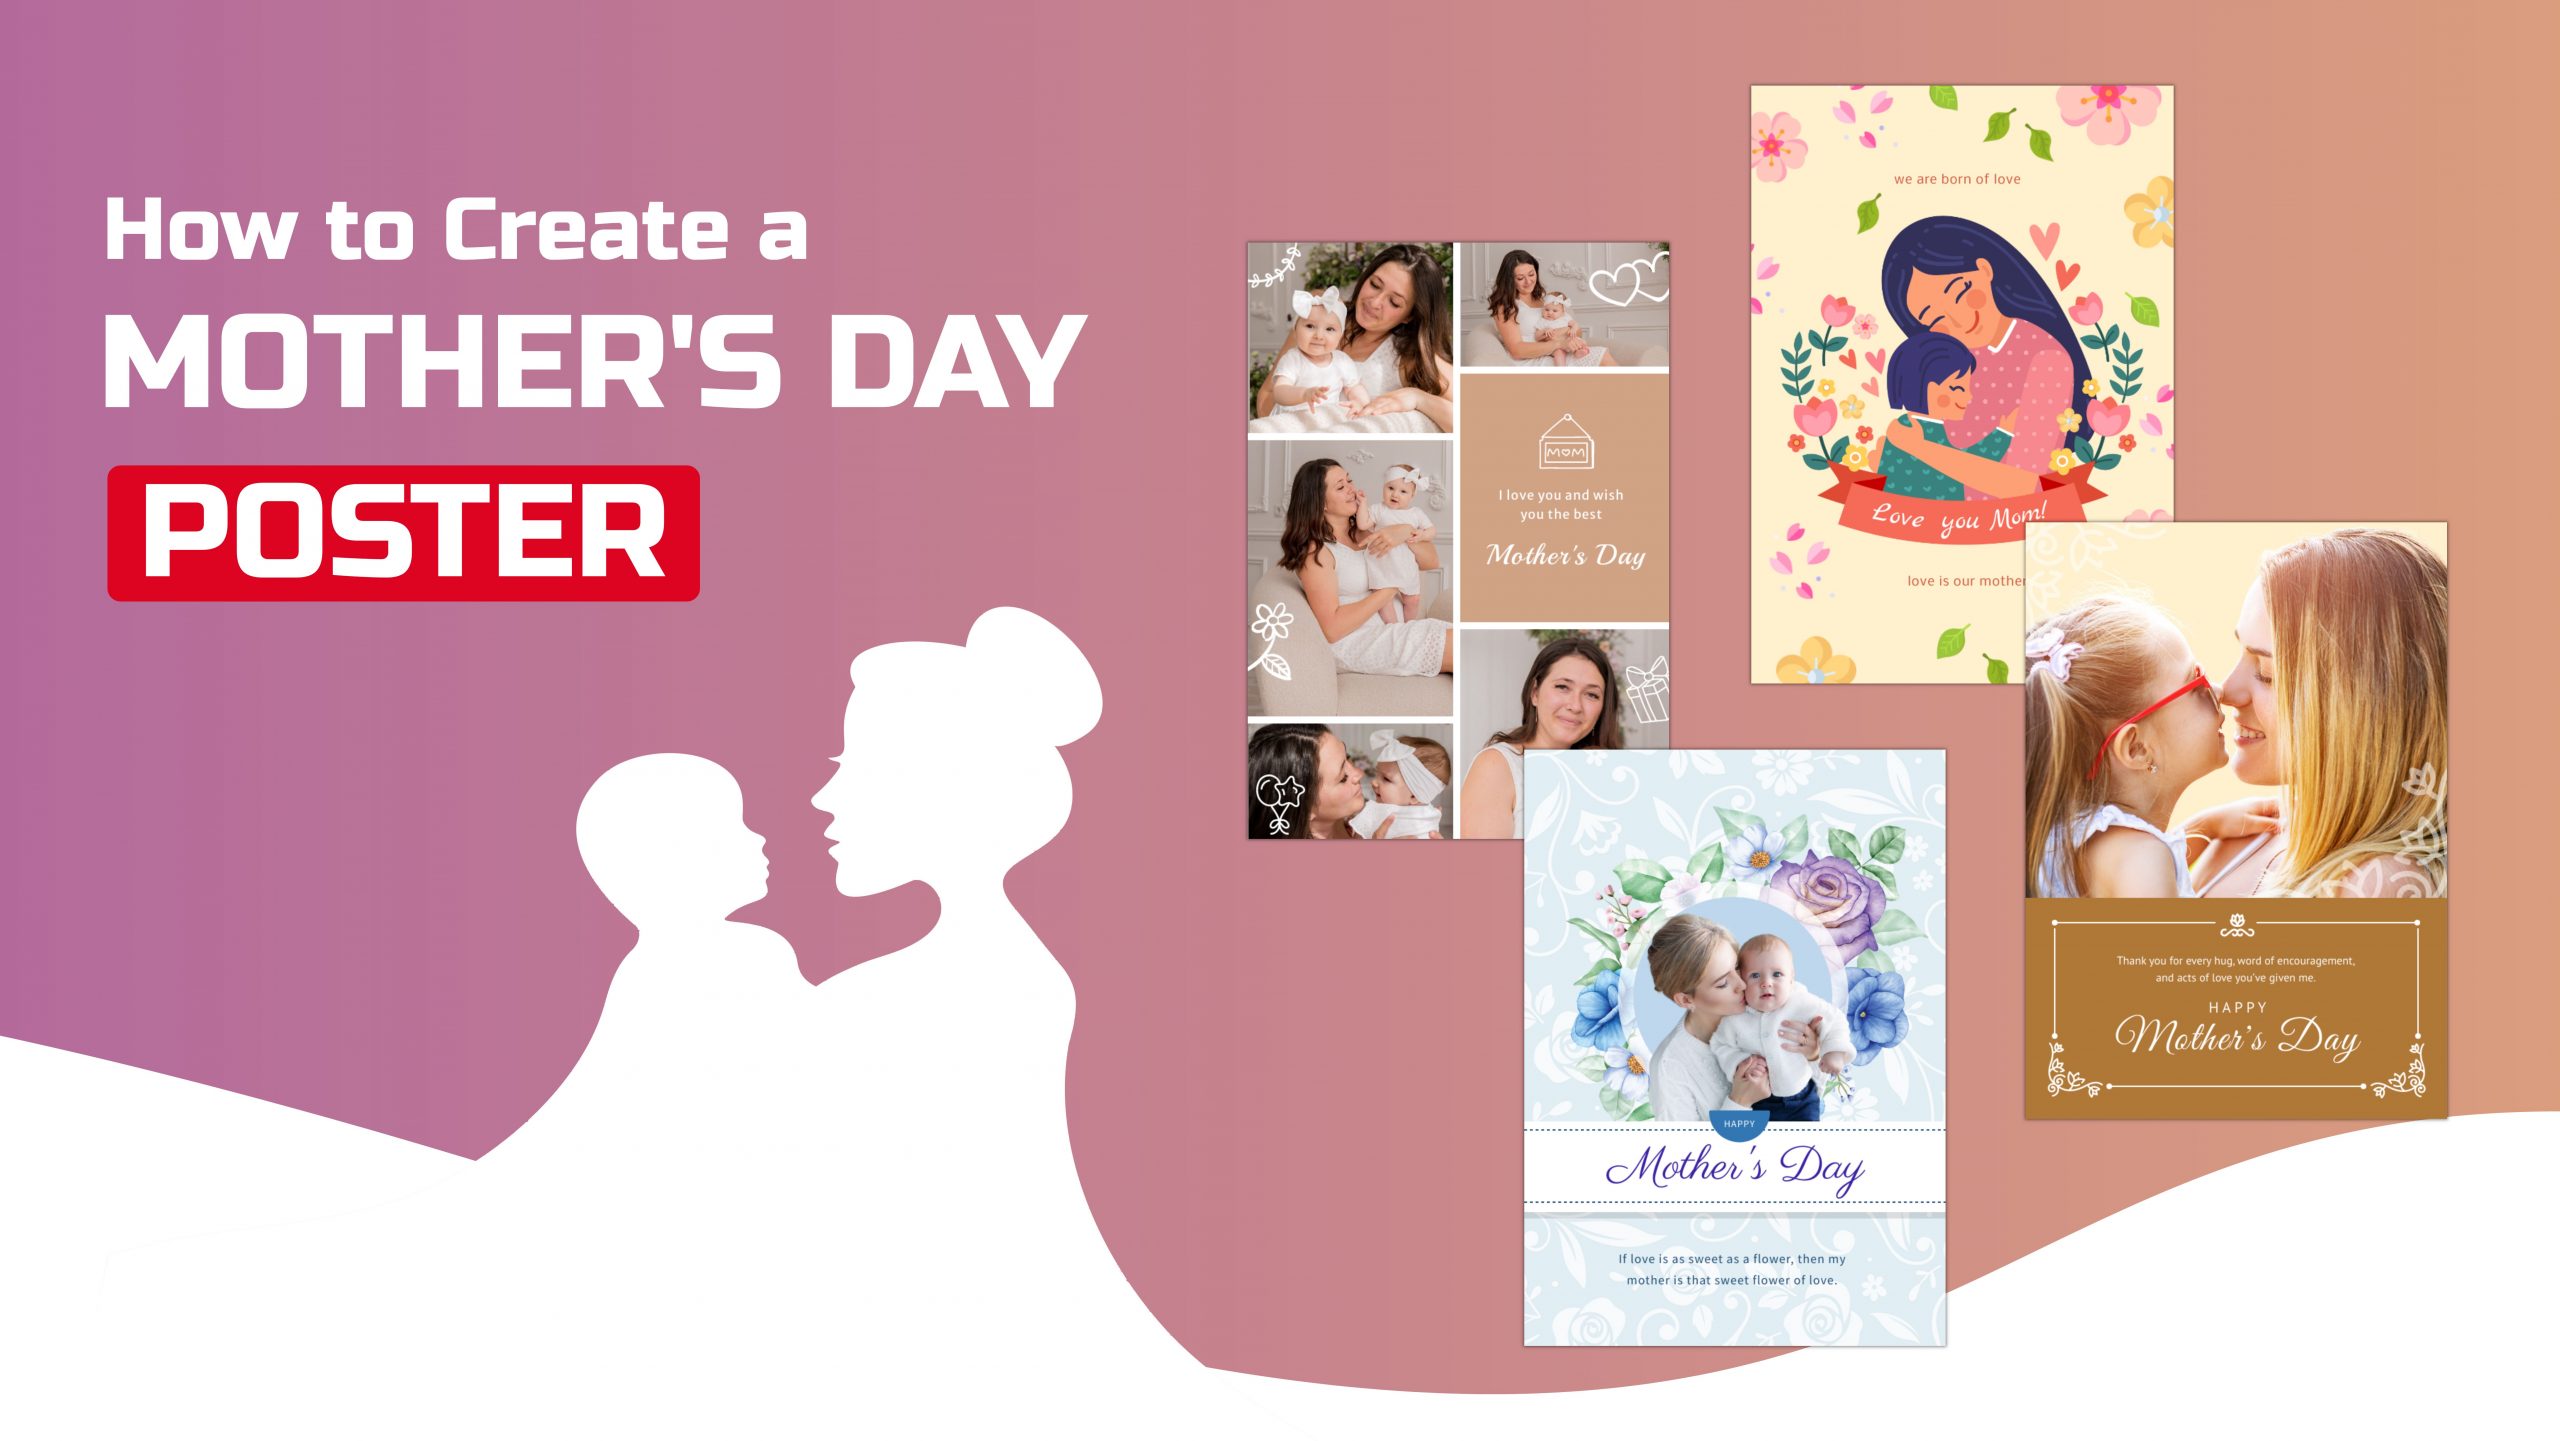 How to Create a Mother's Day Poster